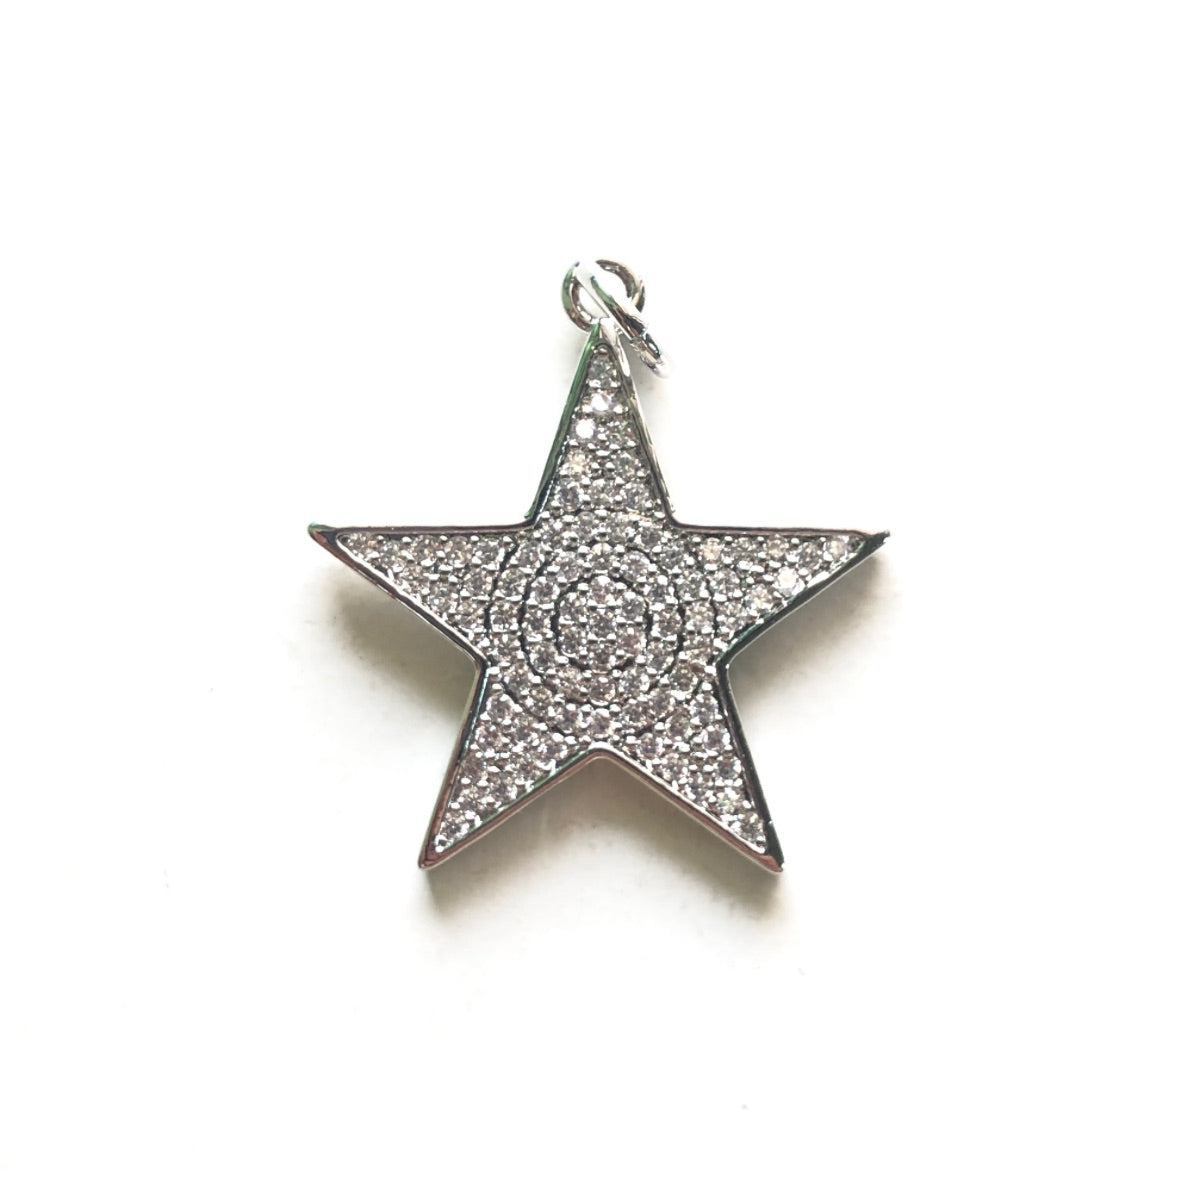 10pcs/lot 26.5*24.5mm CZ Paved Star Charms Silver CZ Paved Charms New Charms Arrivals Sun Moon Stars Charms Beads Beyond